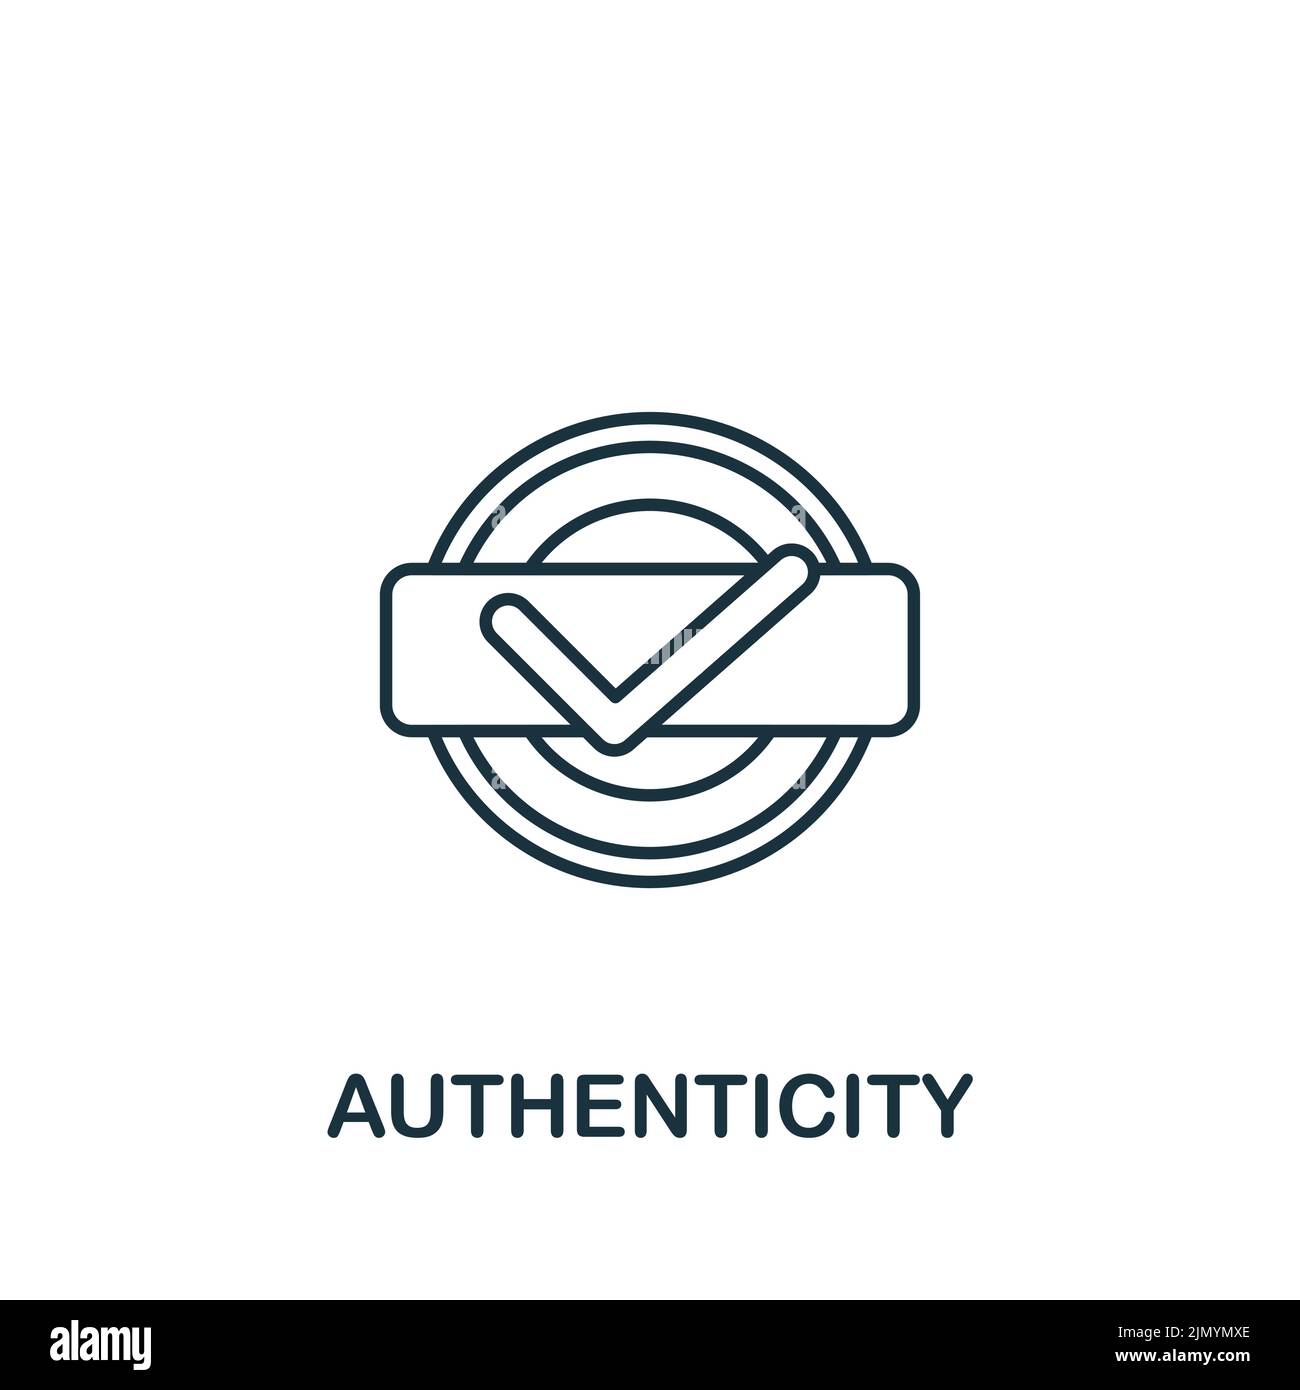 Authnticity icon. Monochrome simple icon for templates, web design and infographics Stock Vector